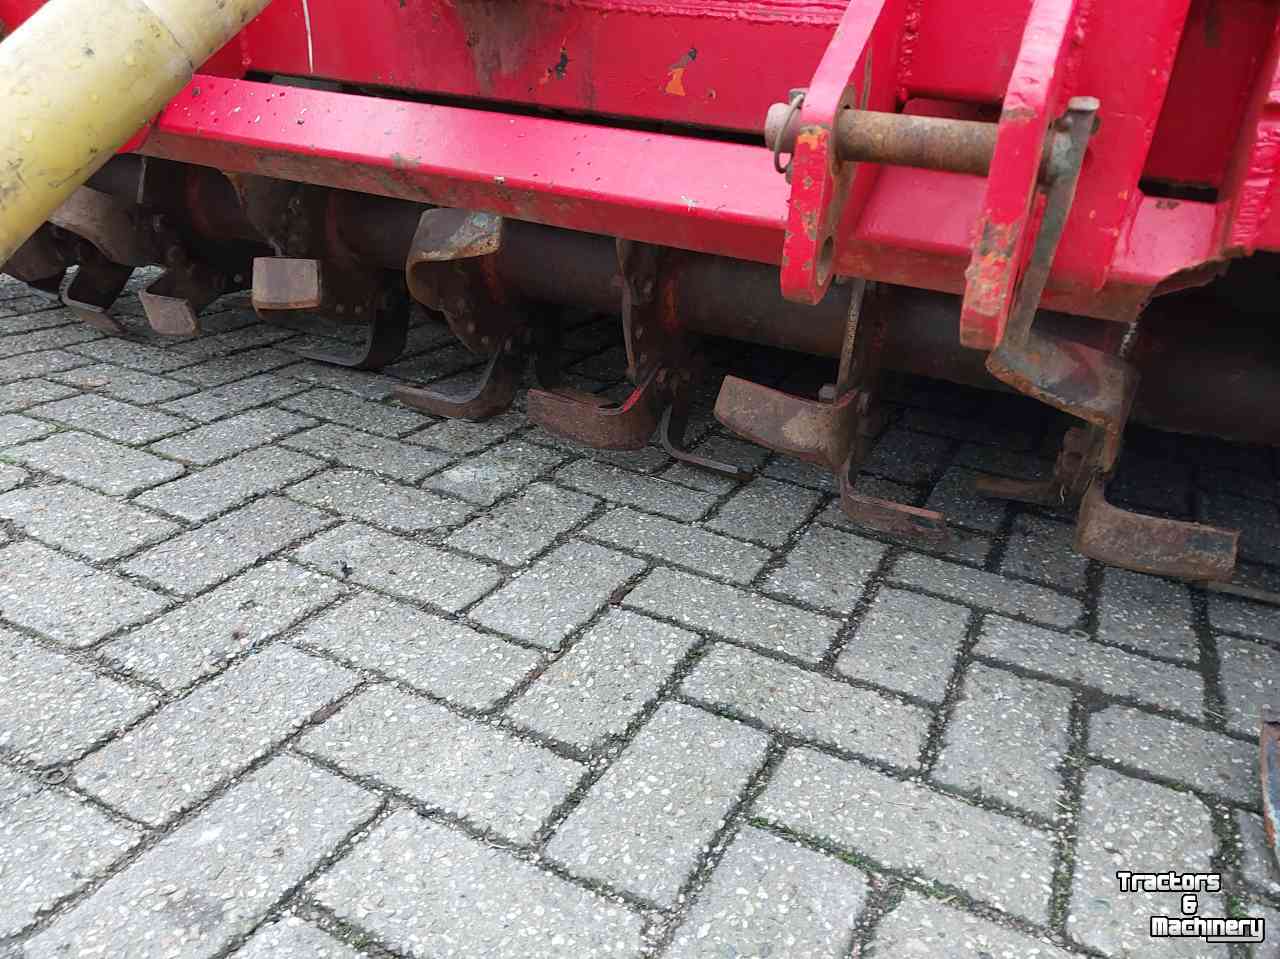 Rotary Tiller  Grondfrees 3 meter breed